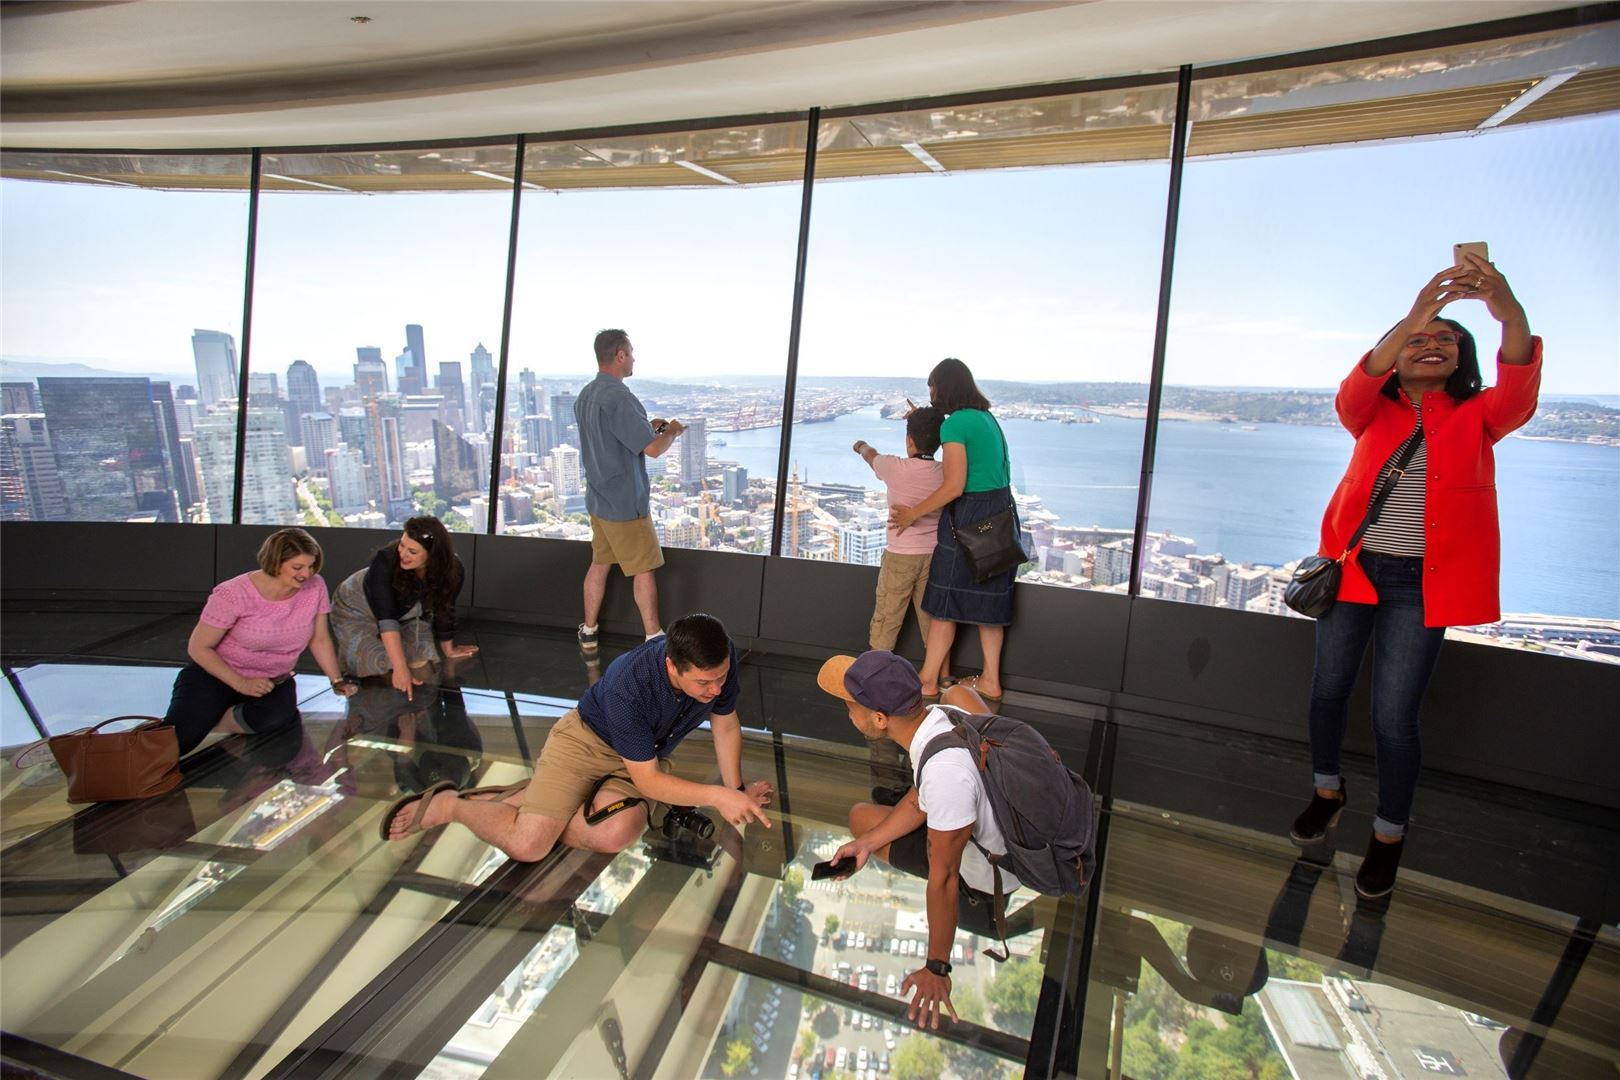 Seattle's Space Needle Debuts World's First Revolving Glass Floor